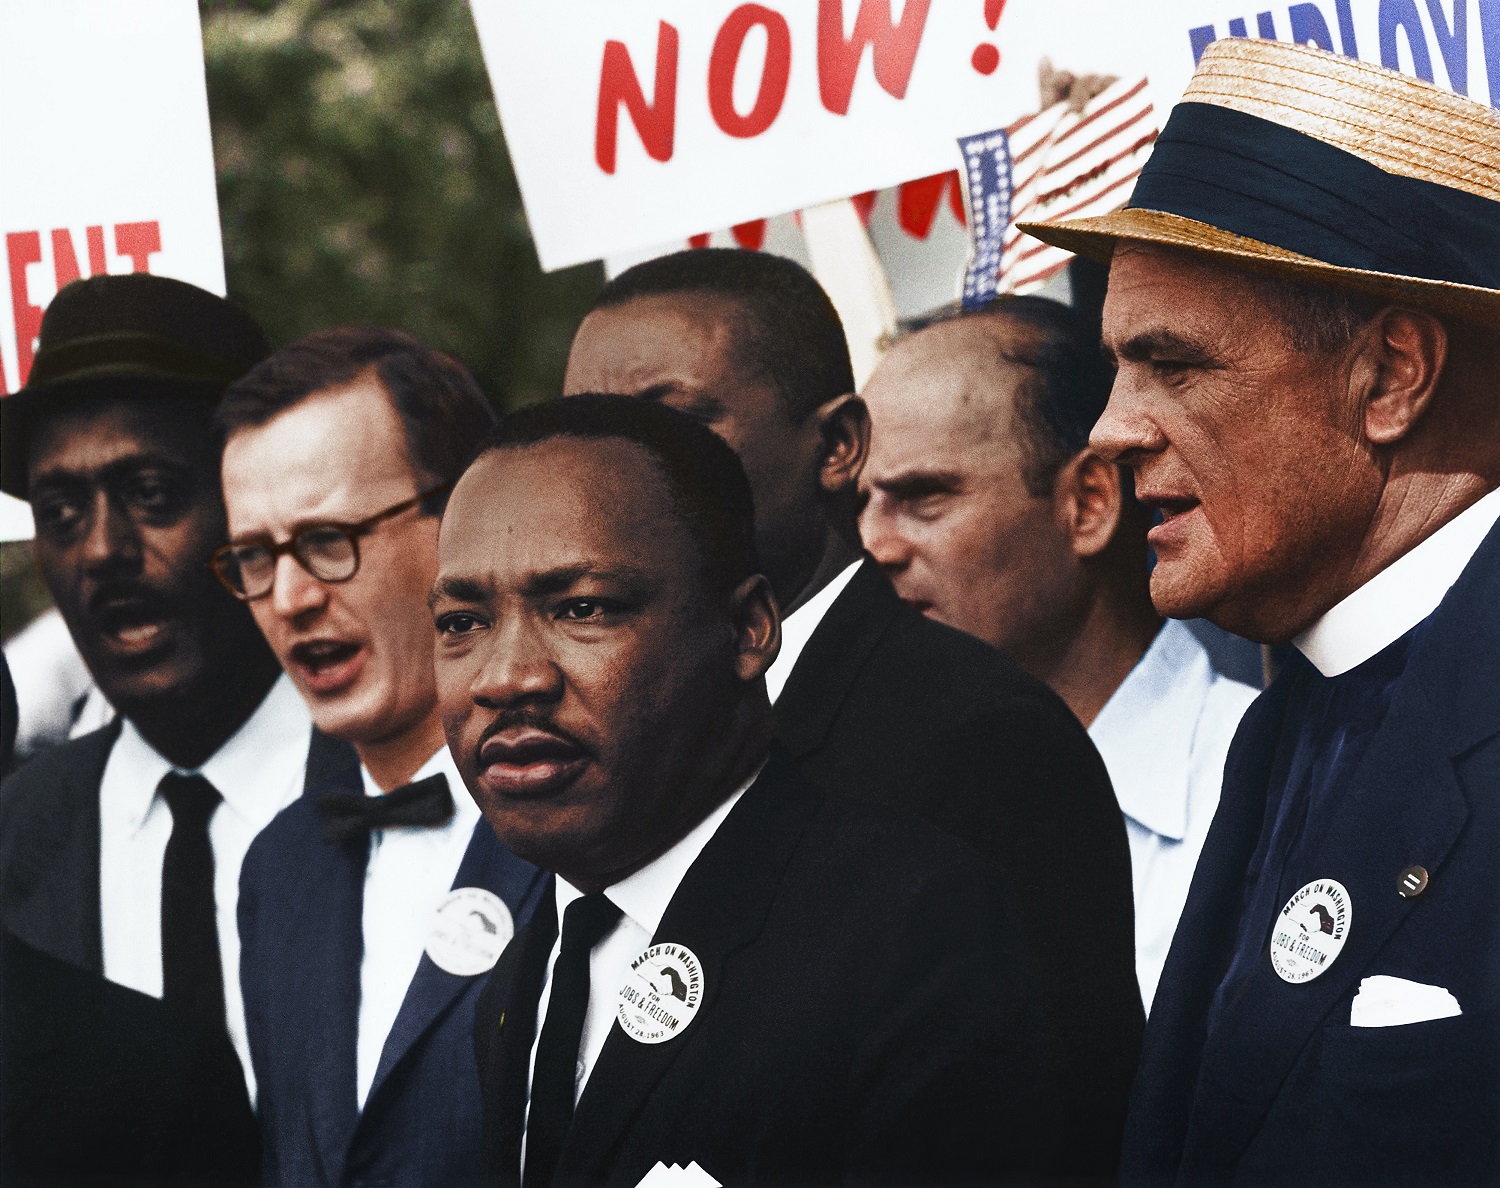 Civil Rights March on Washington, D.C. [Dr. Martin Luther King, Jr. and Mathew Ahmann in a crowd.], 8/28/1963